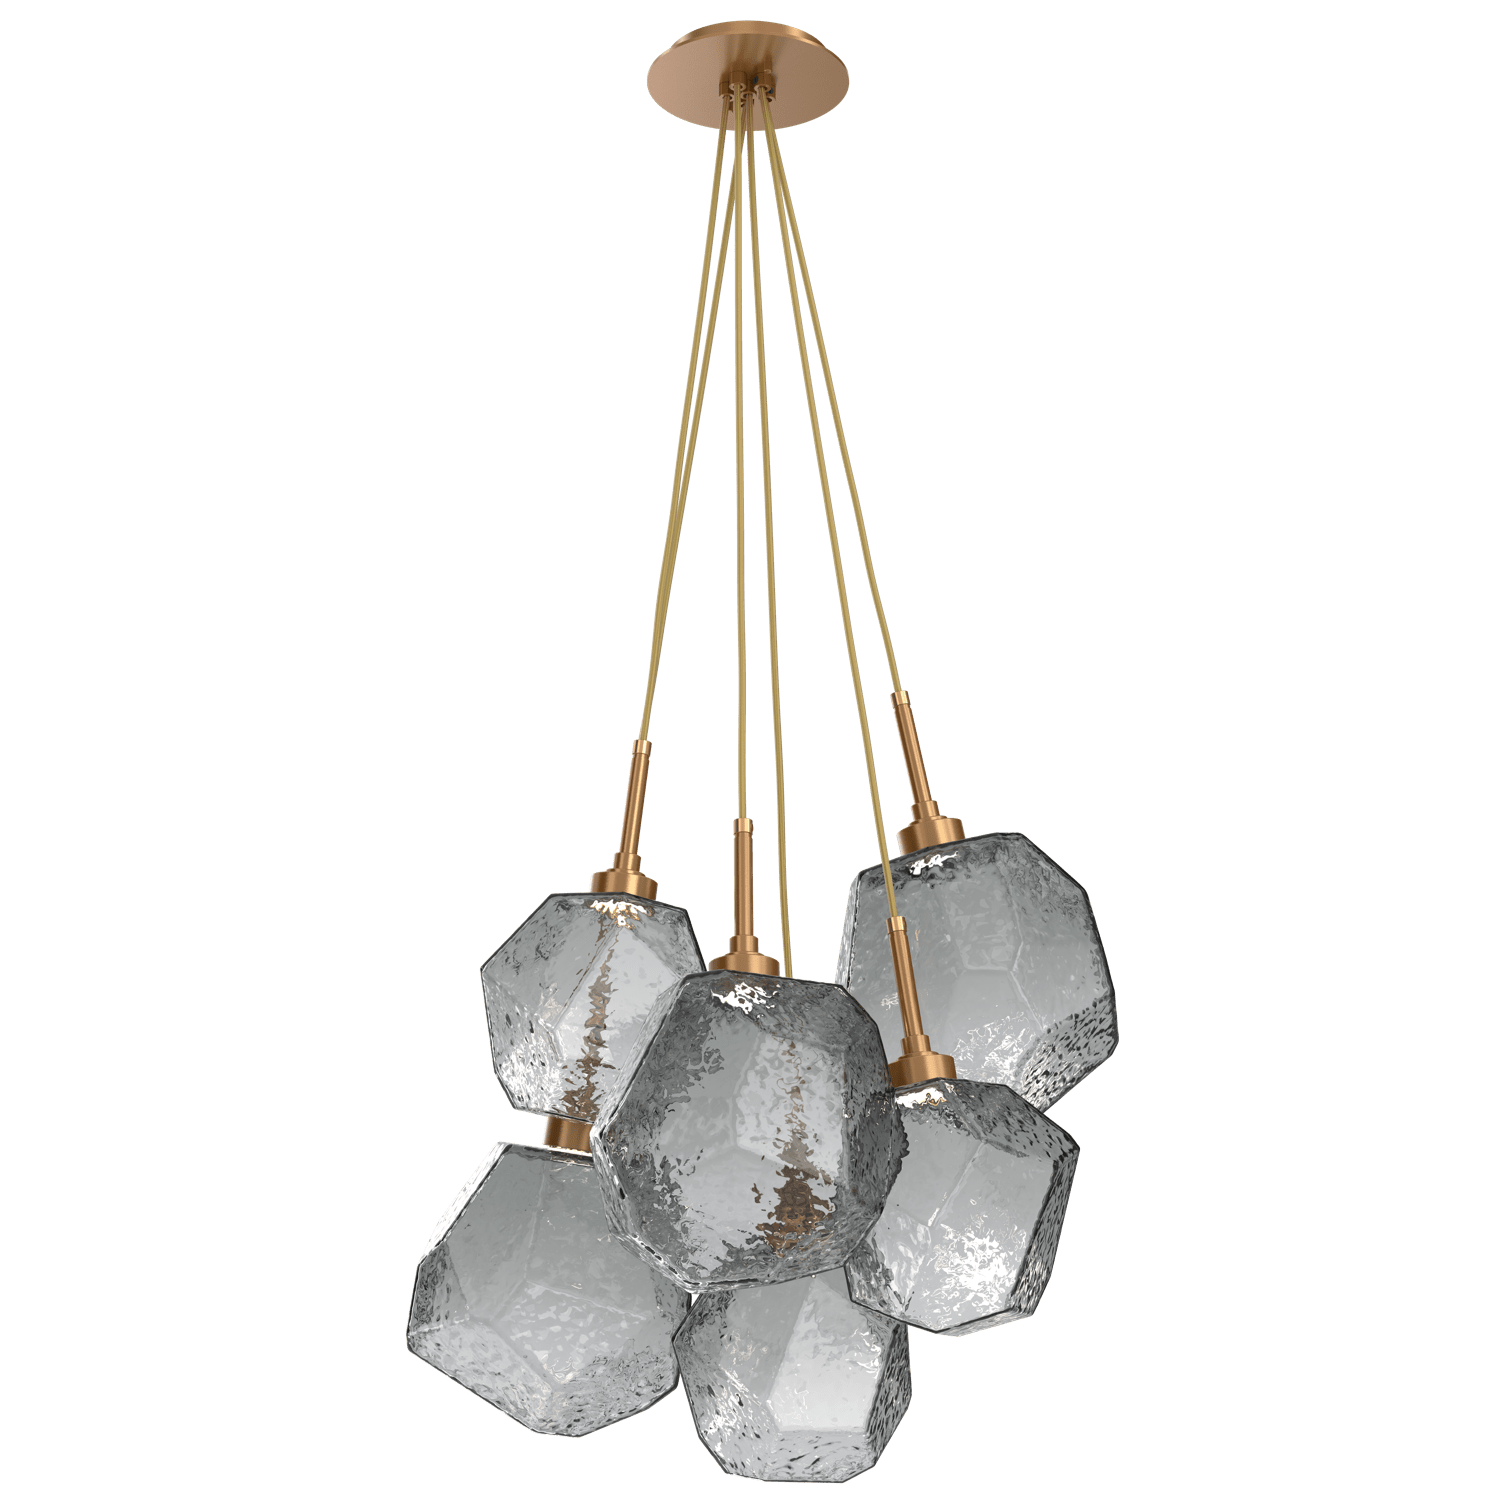 CHB0039-0F-NB-S-Hammerton-Studio-Gem-6-light-cluster-pendant-light-with-novel-brass-finish-and-smoke-blown-glass-shades-and-LED-lamping